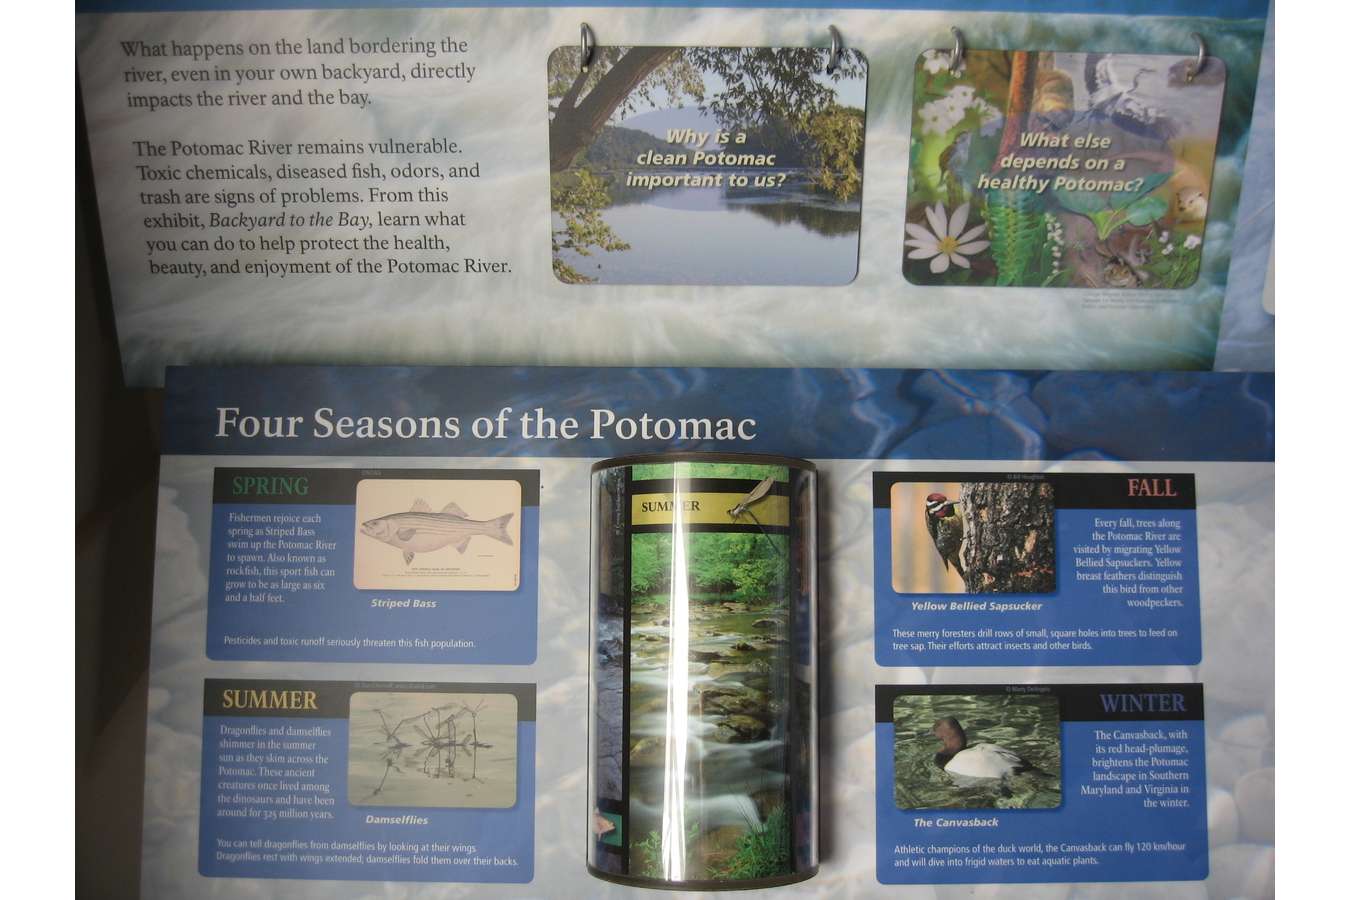 4 seasons : Four seasons of the Potomac is a cylinder poster showing beauty of the area through the year